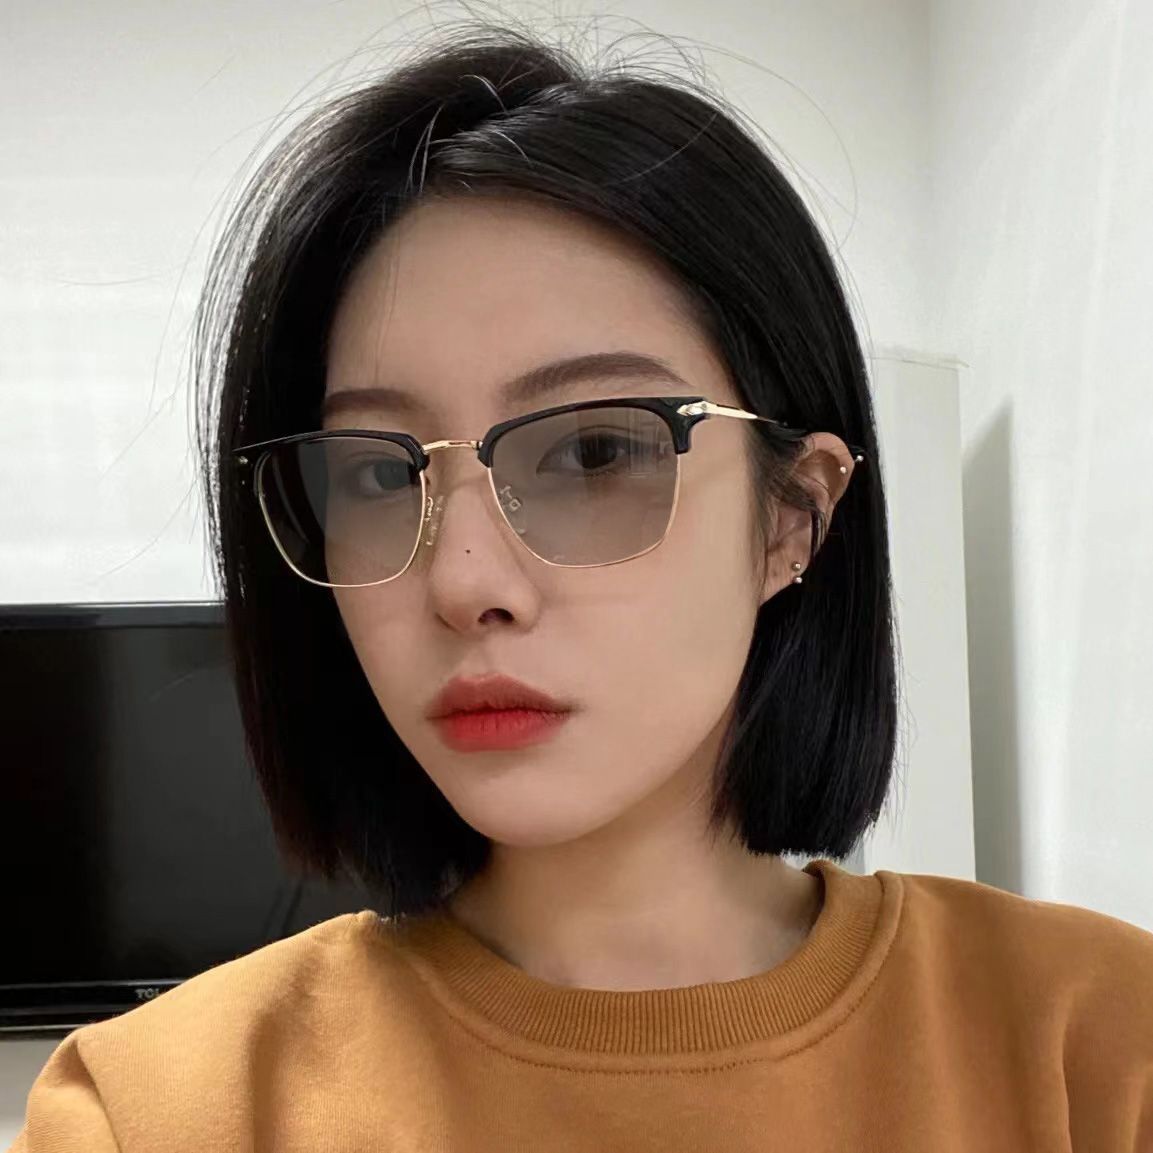 Polished Scoundrels Color Changing Glasses Korean Style UV Protection Eye Protection for Driving Semi-Rimless Frame Glasses Women Can Be with Degrees Trendy